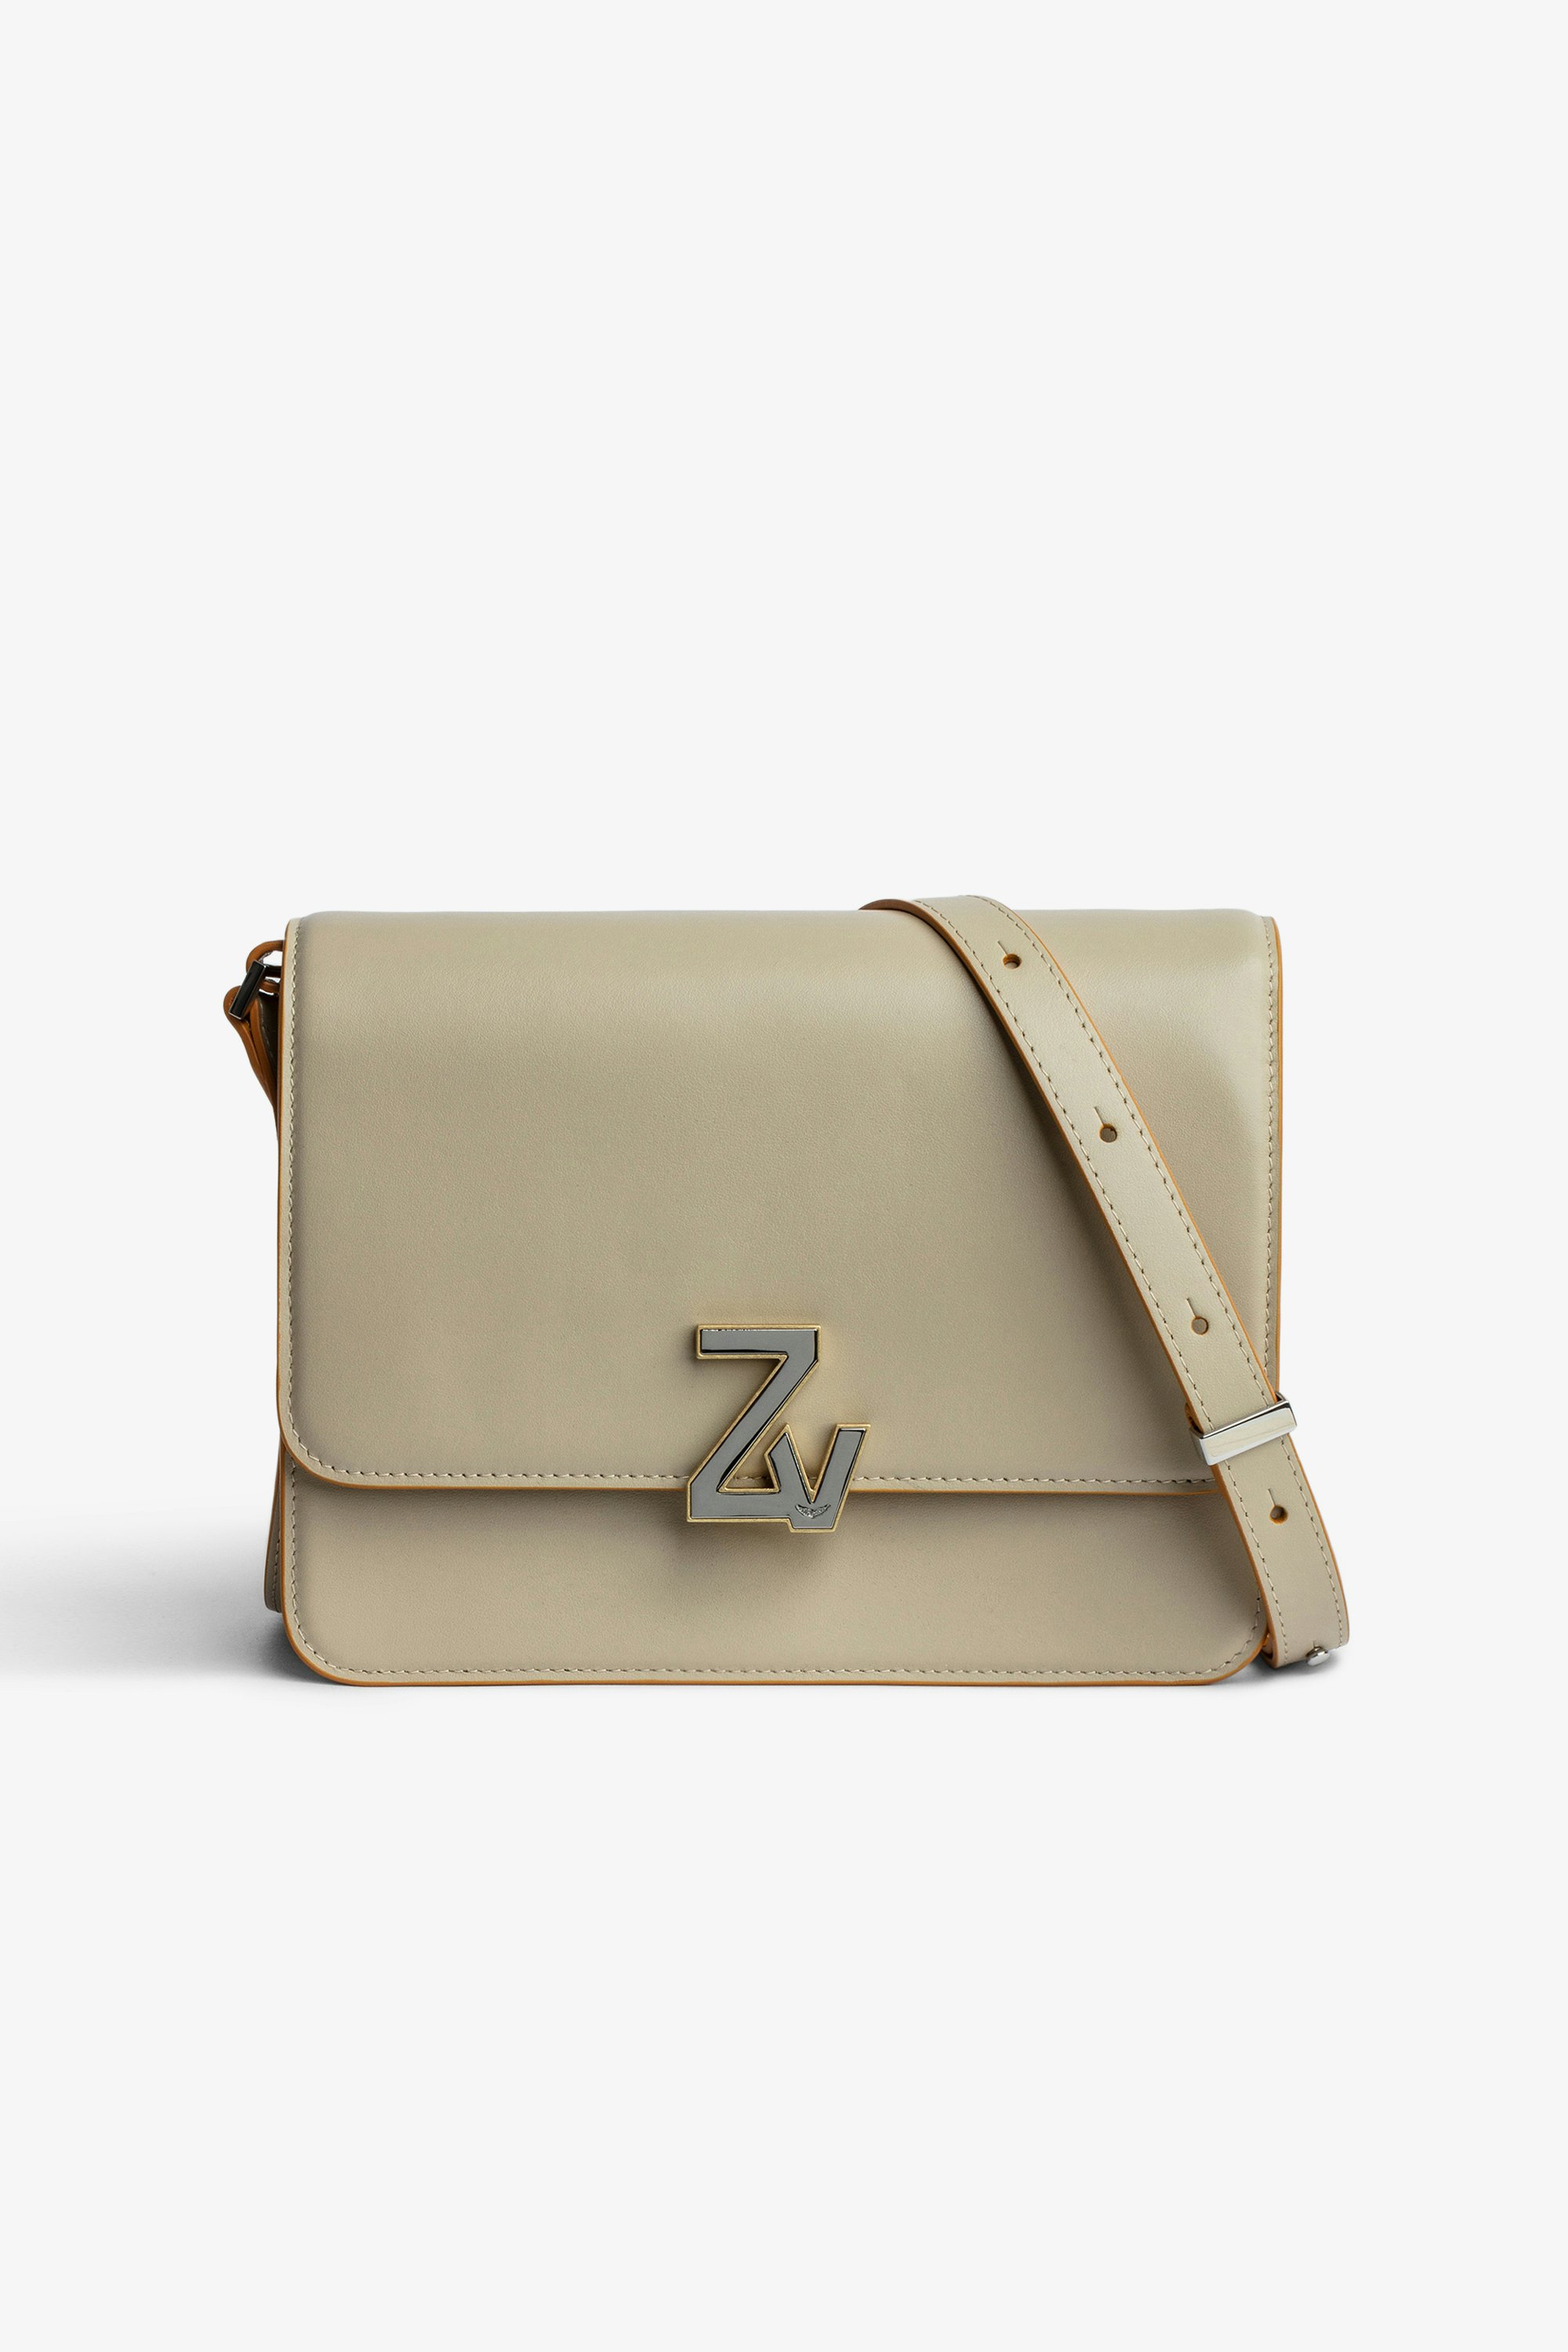 ZV Initiale Le City バッグ Women’s smooth beige leather bag with flap, ZV clasp and a shoulder strap